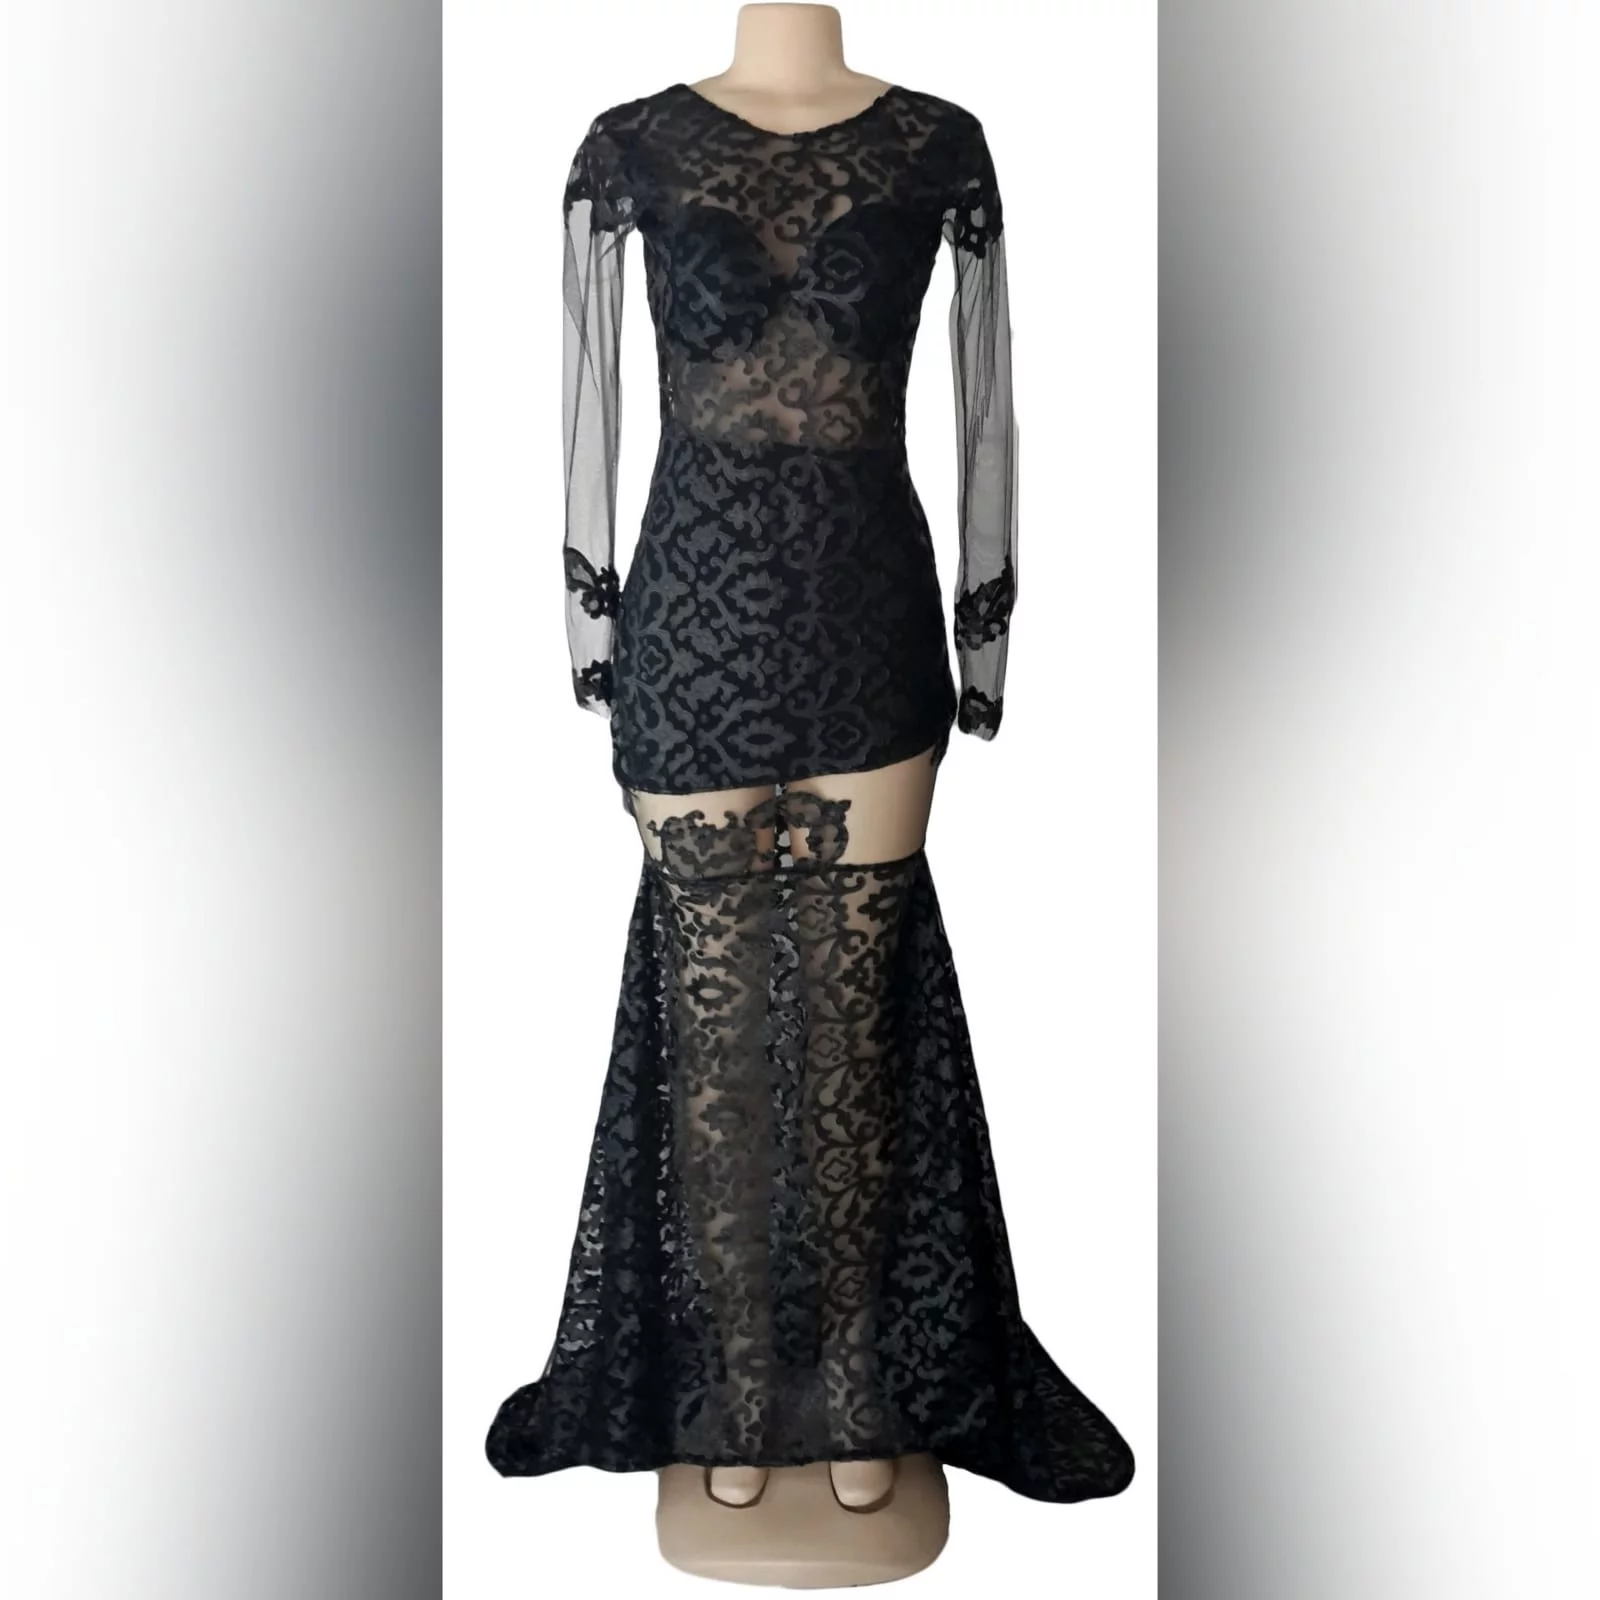 21st birthday party black dress 3 black long suede lace evening dress for 21st birthday party, with sheer black long sleeves and sheer thigh area, with a train and an open back